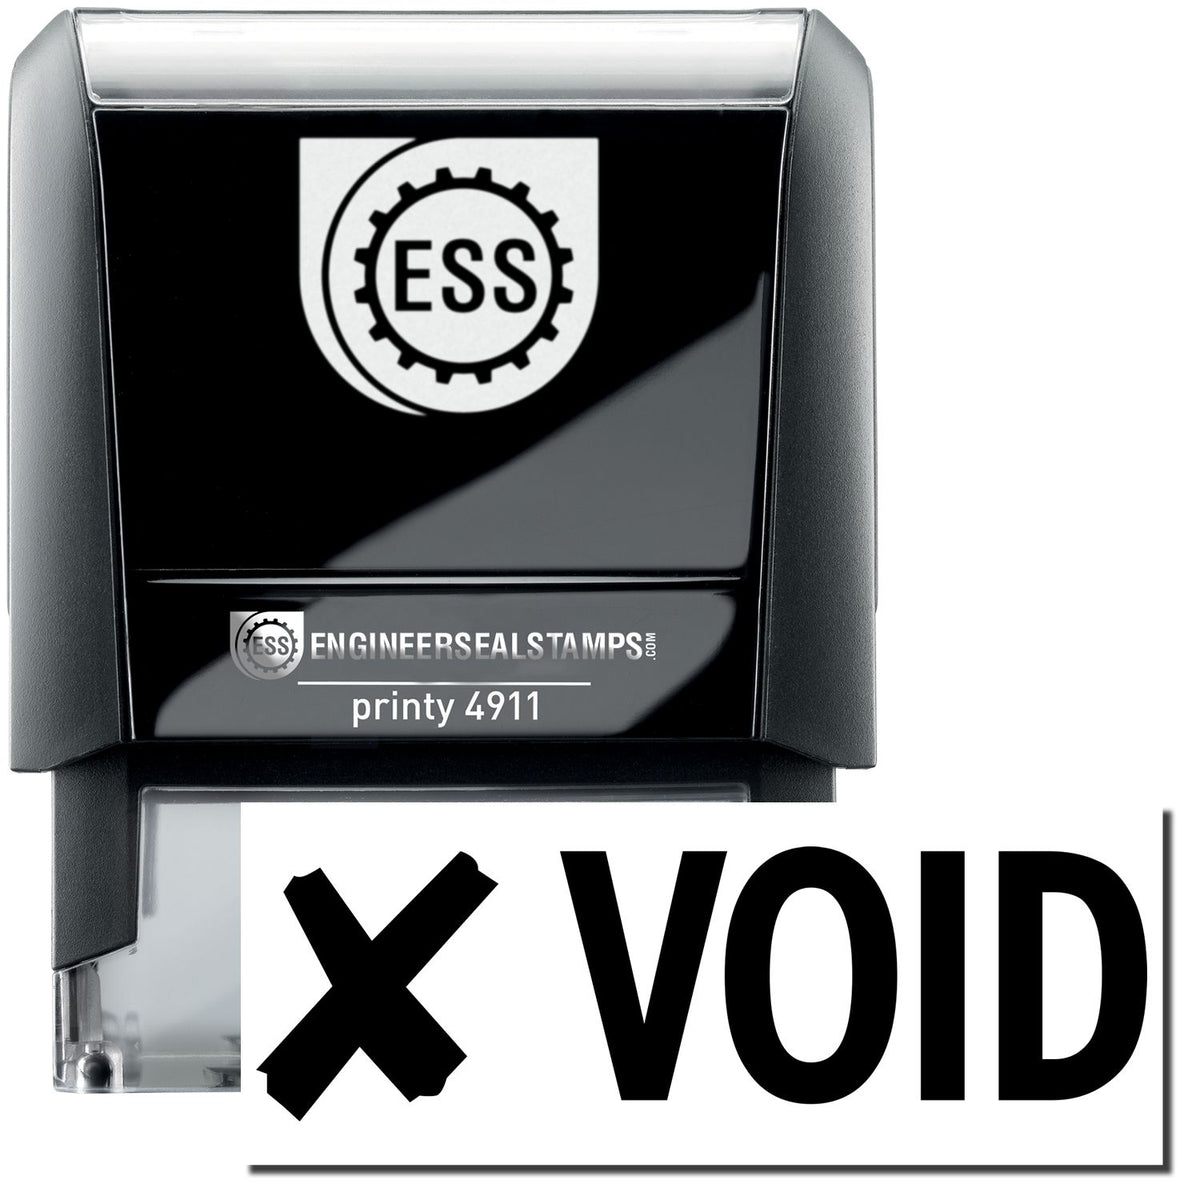 A self-inking stamp with a stamped image showing how the text &quot;VOID&quot; with an image of a cross (X) on the left is displayed after stamping.